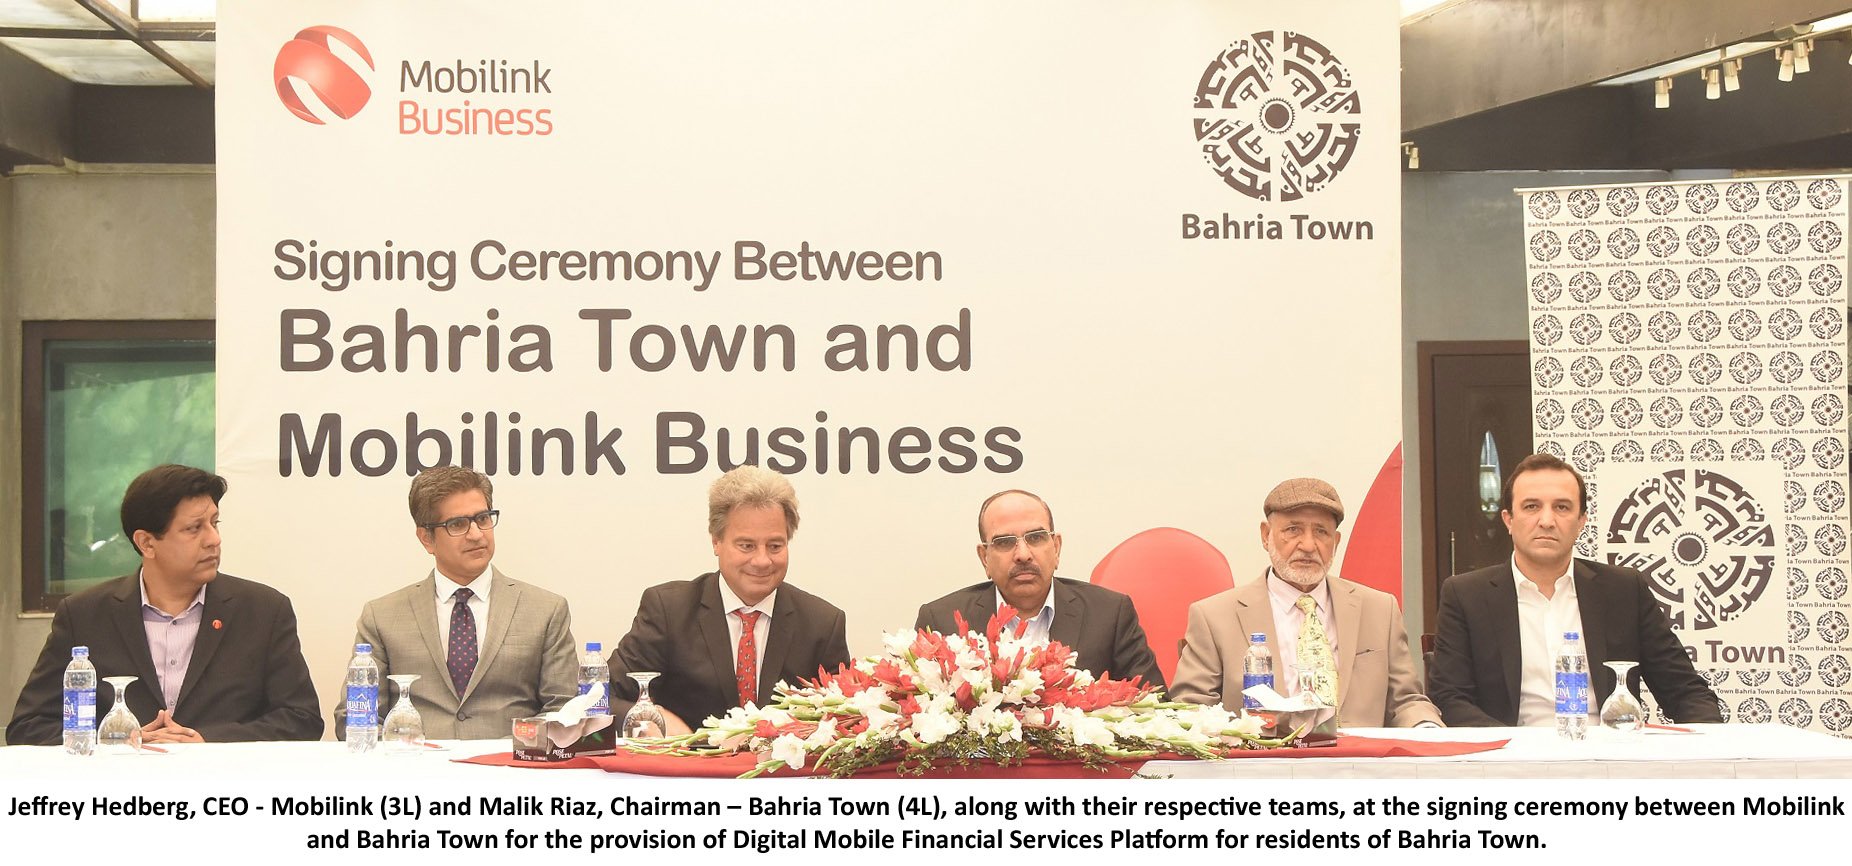 Mobilink goes Digital with Bahria Town - Digital ‘Exceleration’